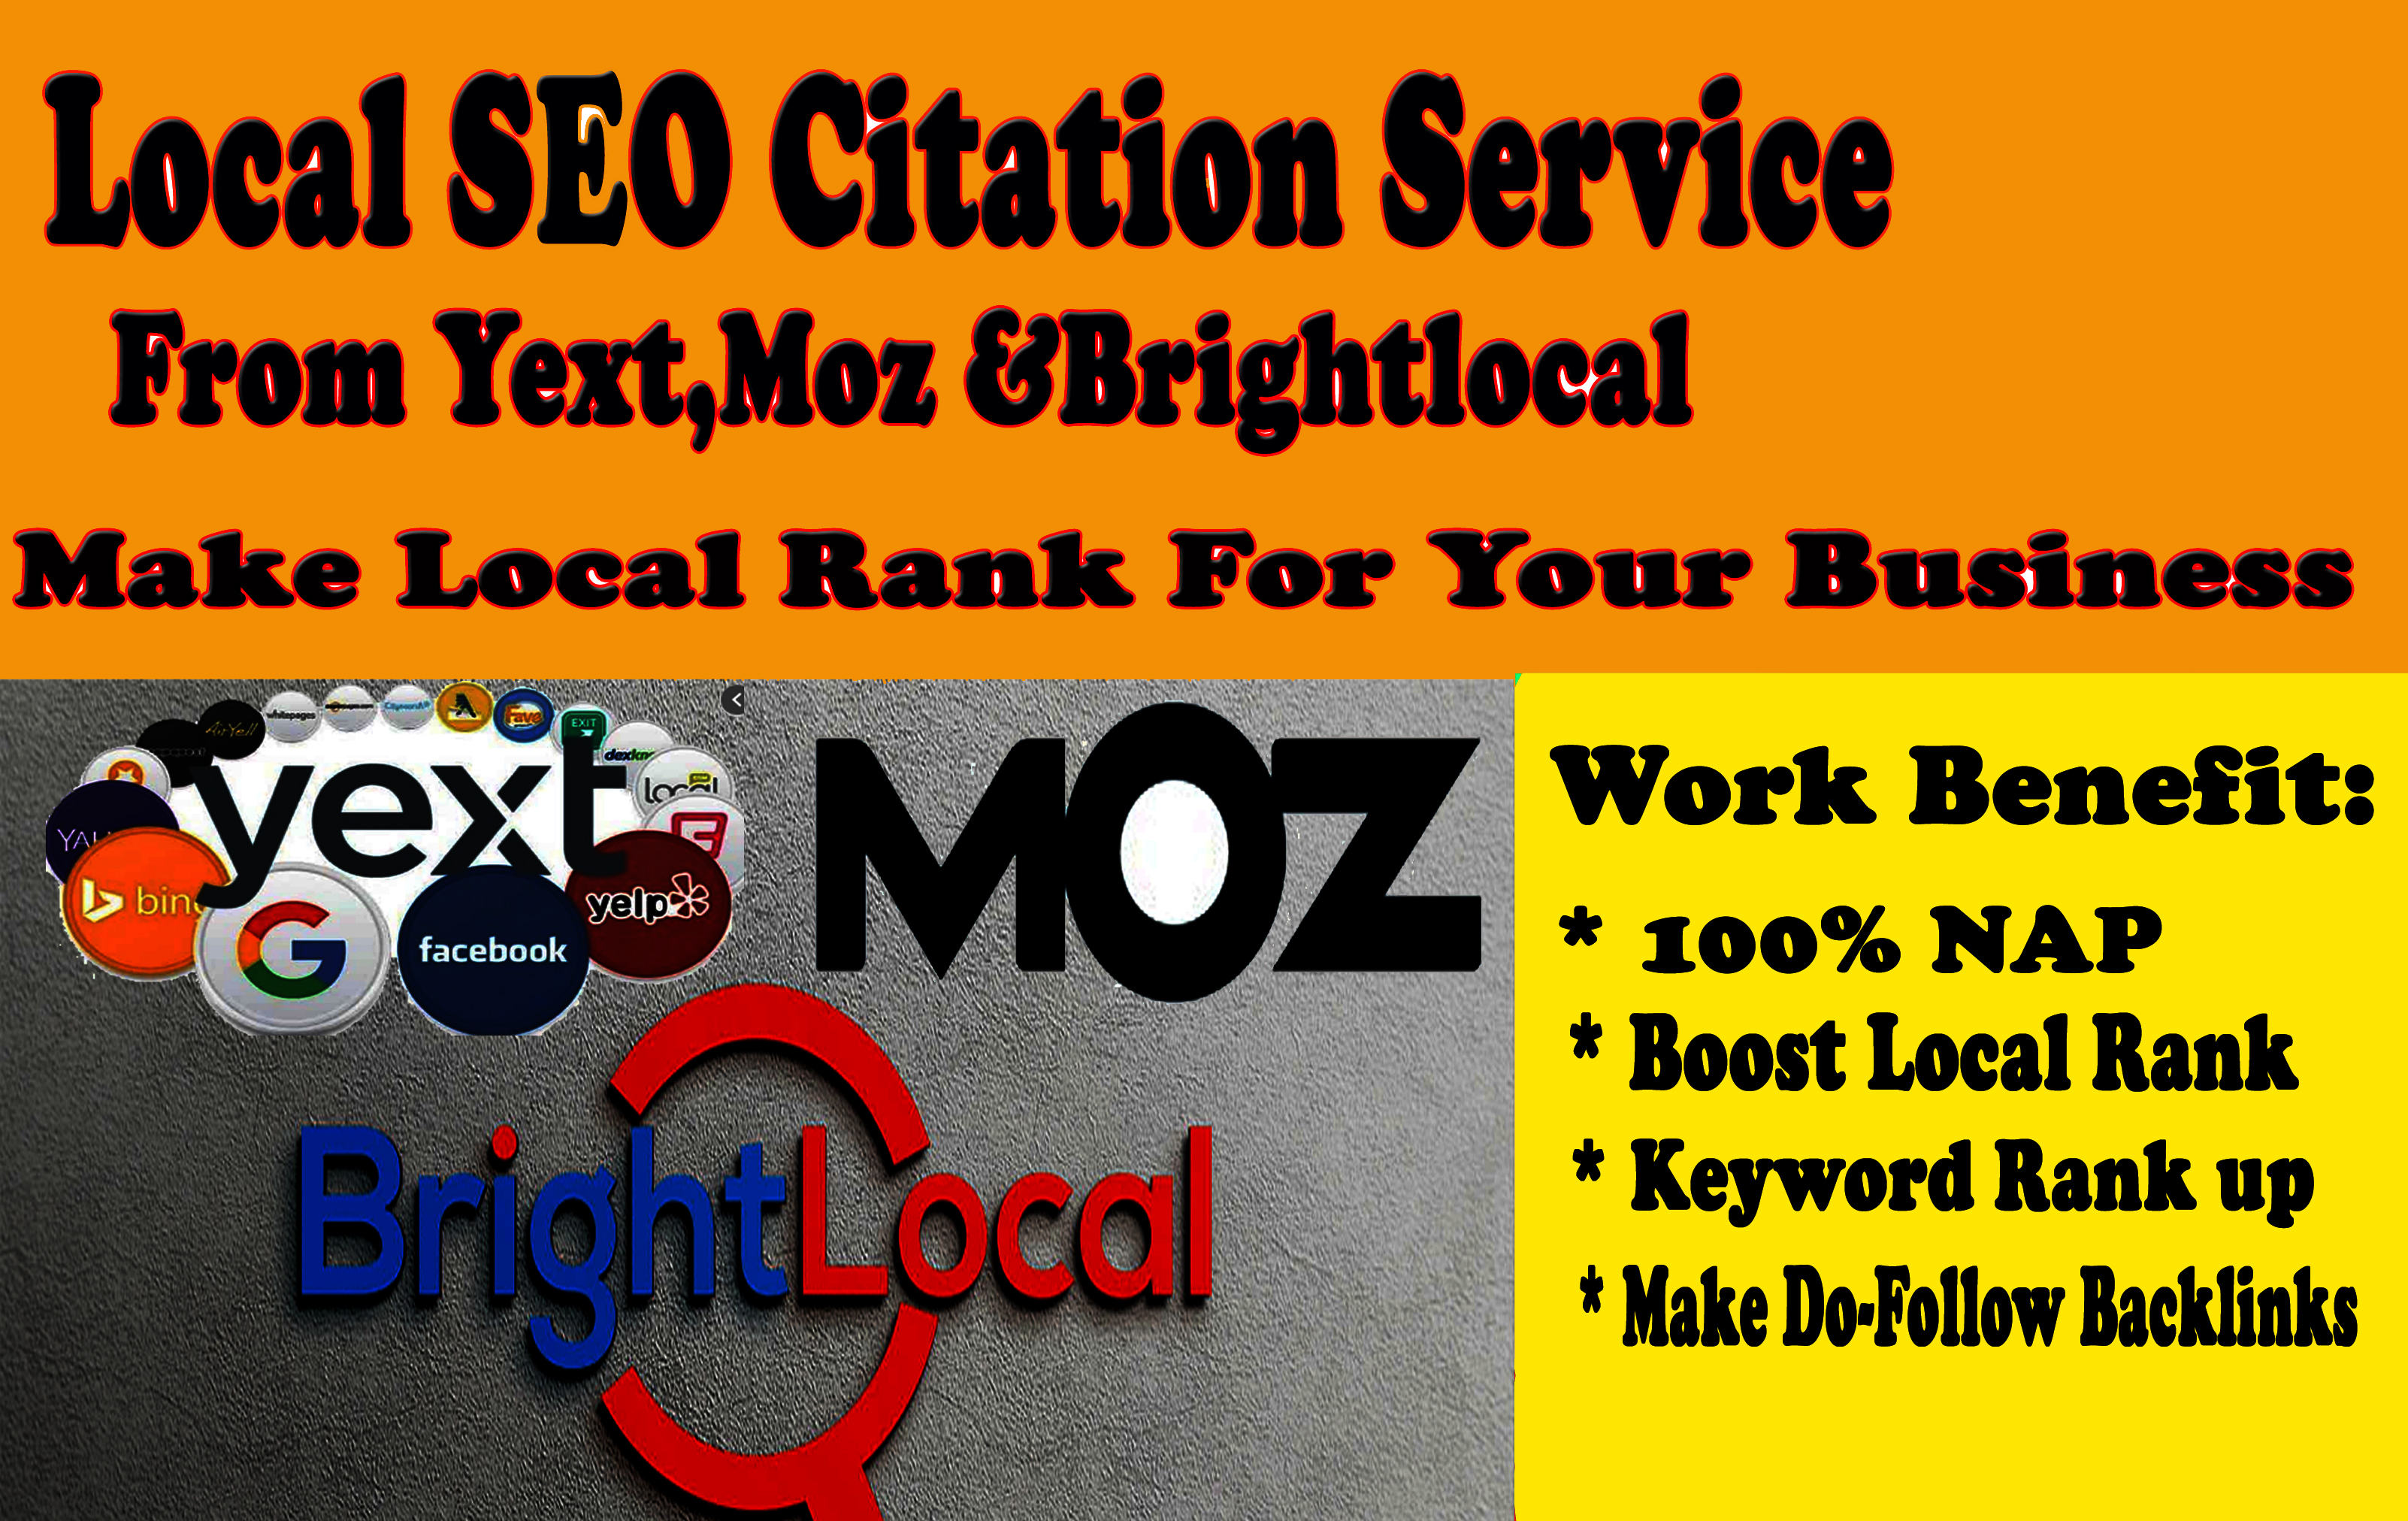 15851I will do 100 local citations from yext, moz and brightlocal